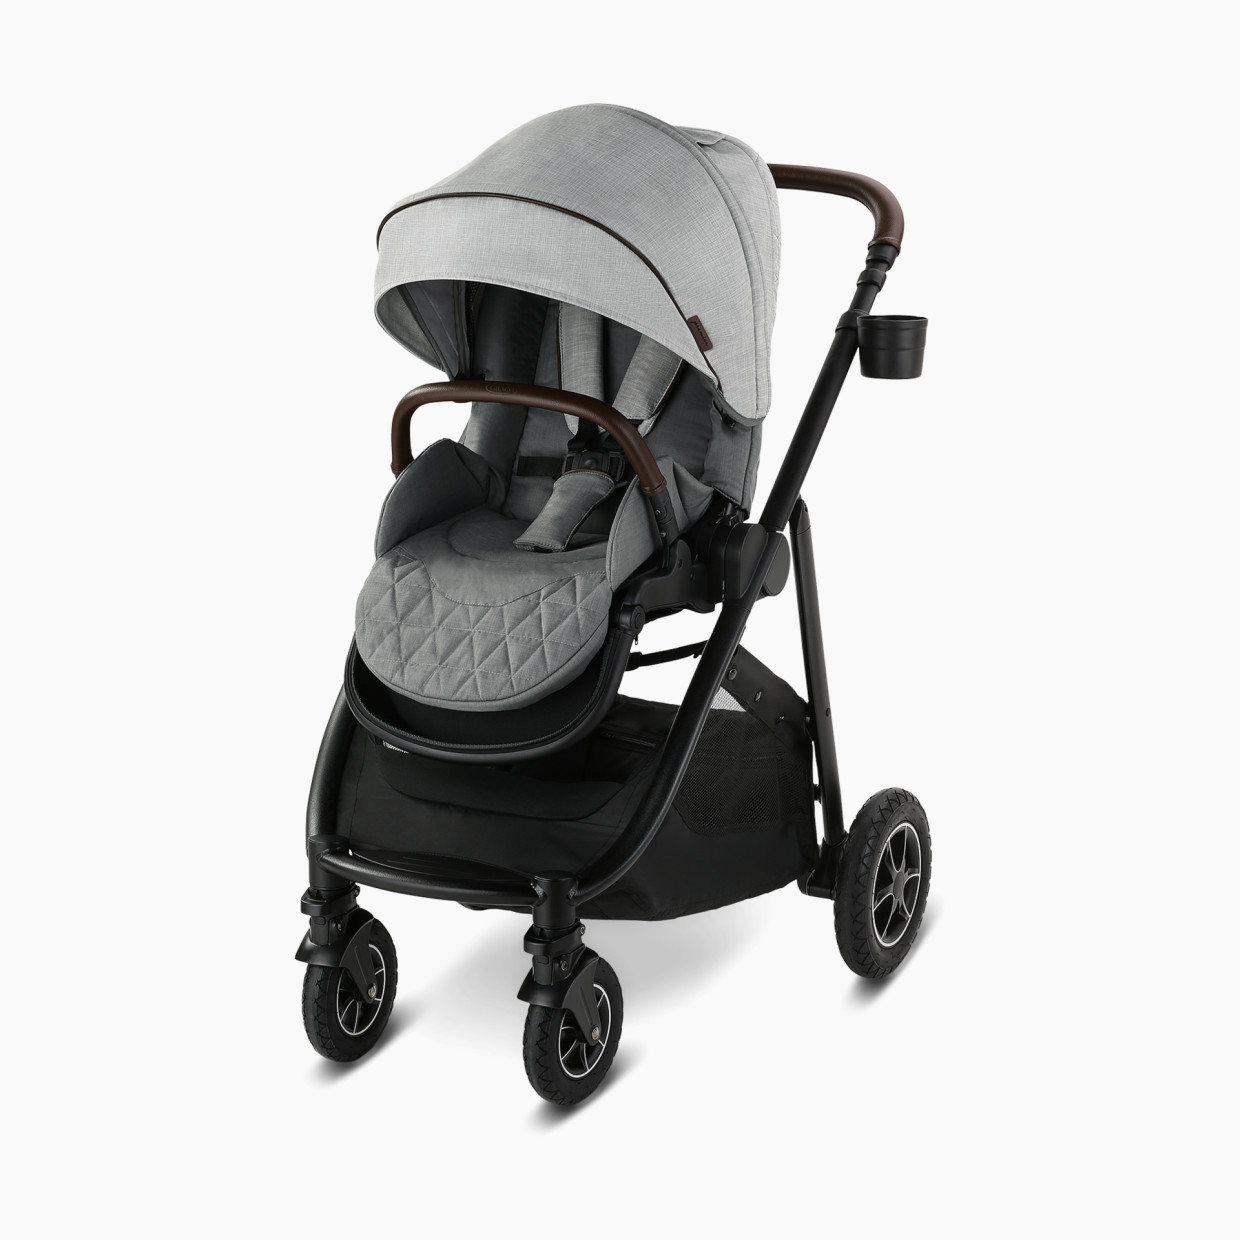 Graco Graco Premier Modes Lux Stroller - Midtown Collection.